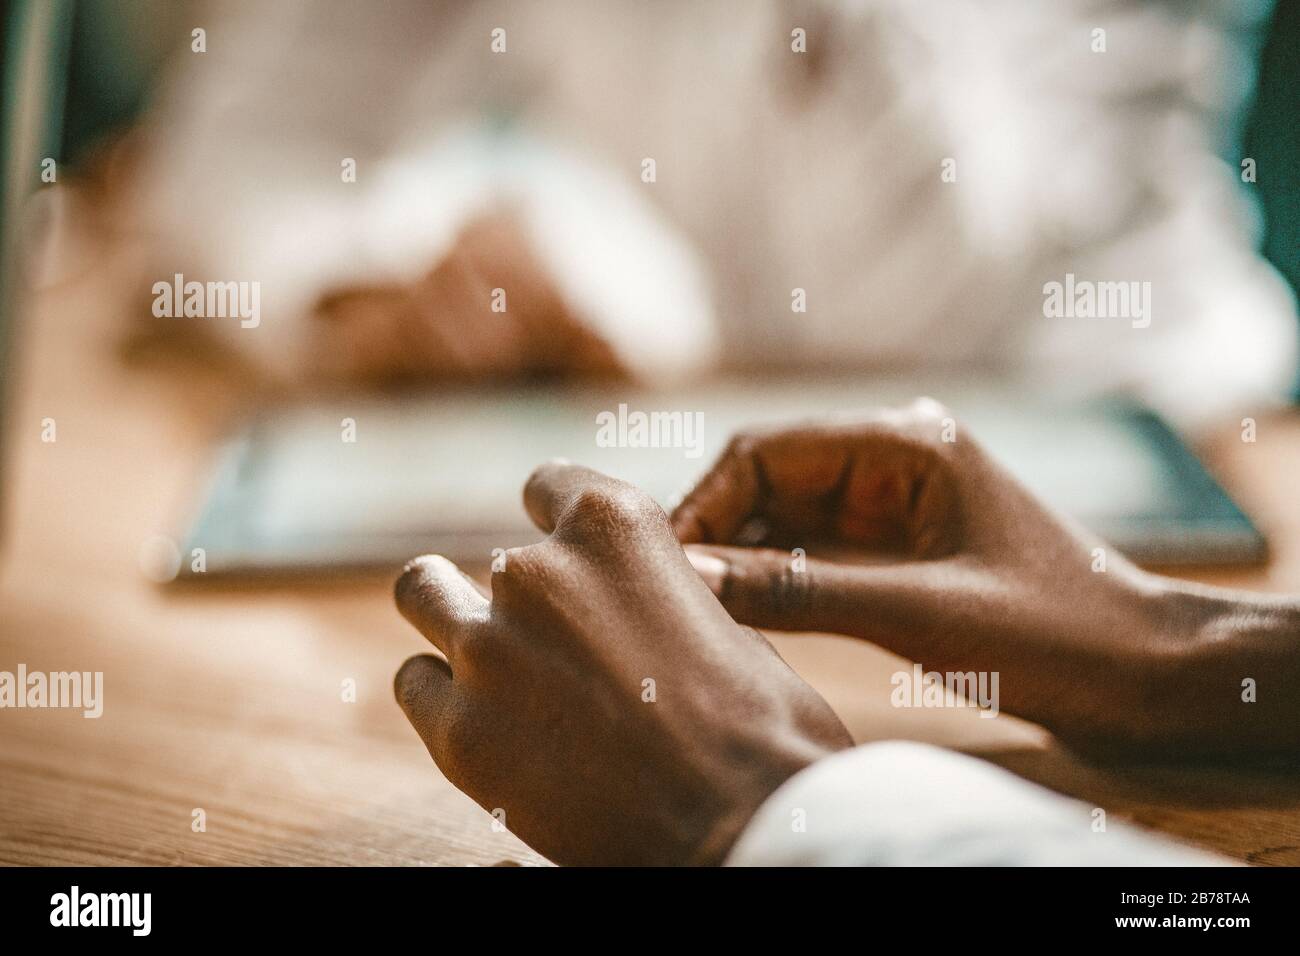 African Business Woman's Hands Going To Sign Documents Stock Photo